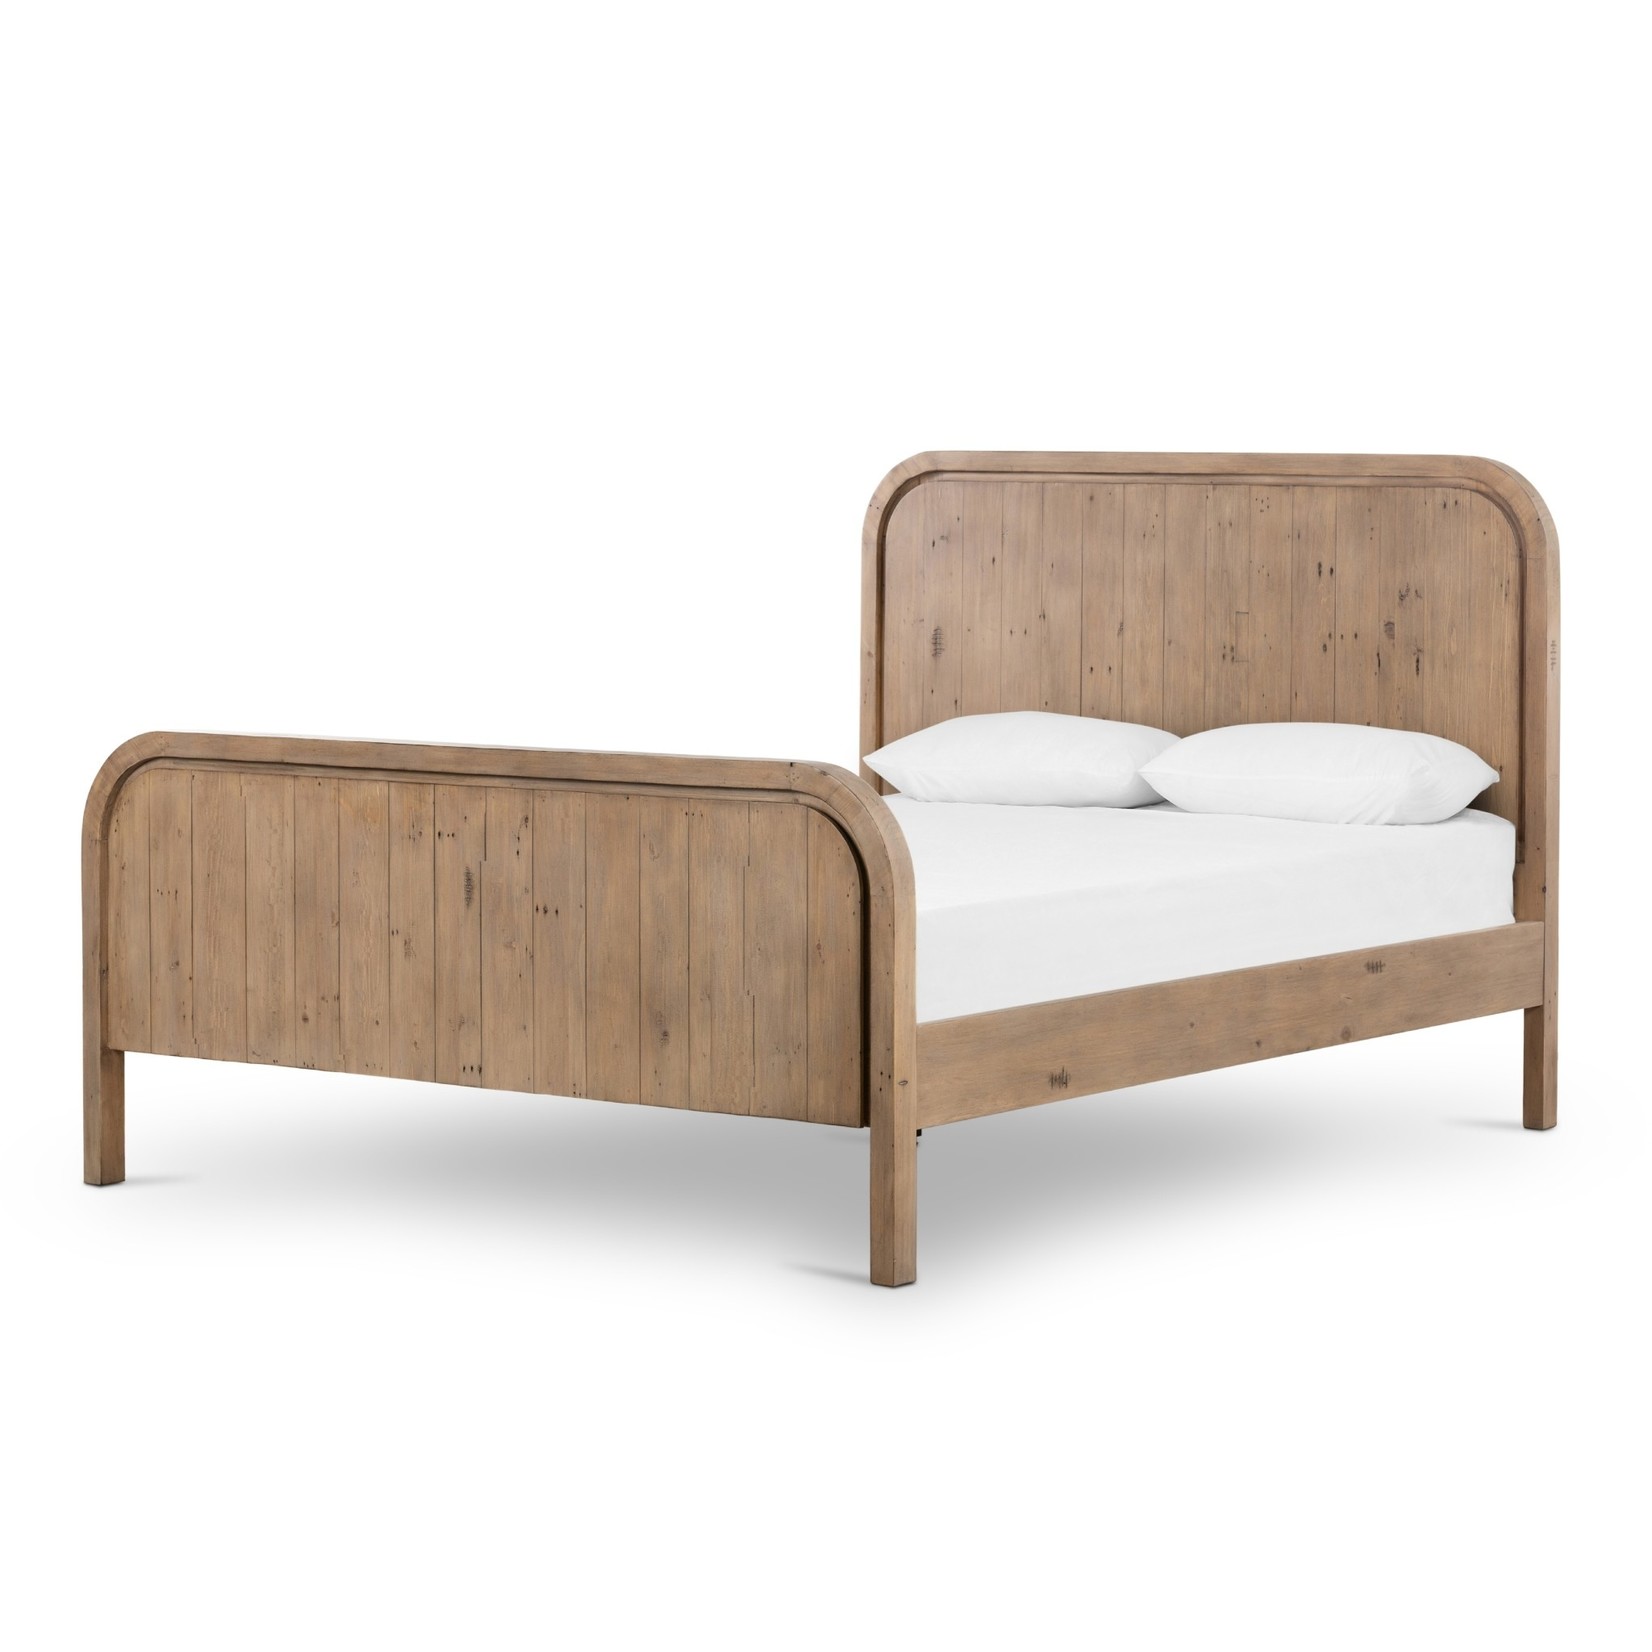 Four Hands EVERSON BED-Scrubbed Teak- King Size